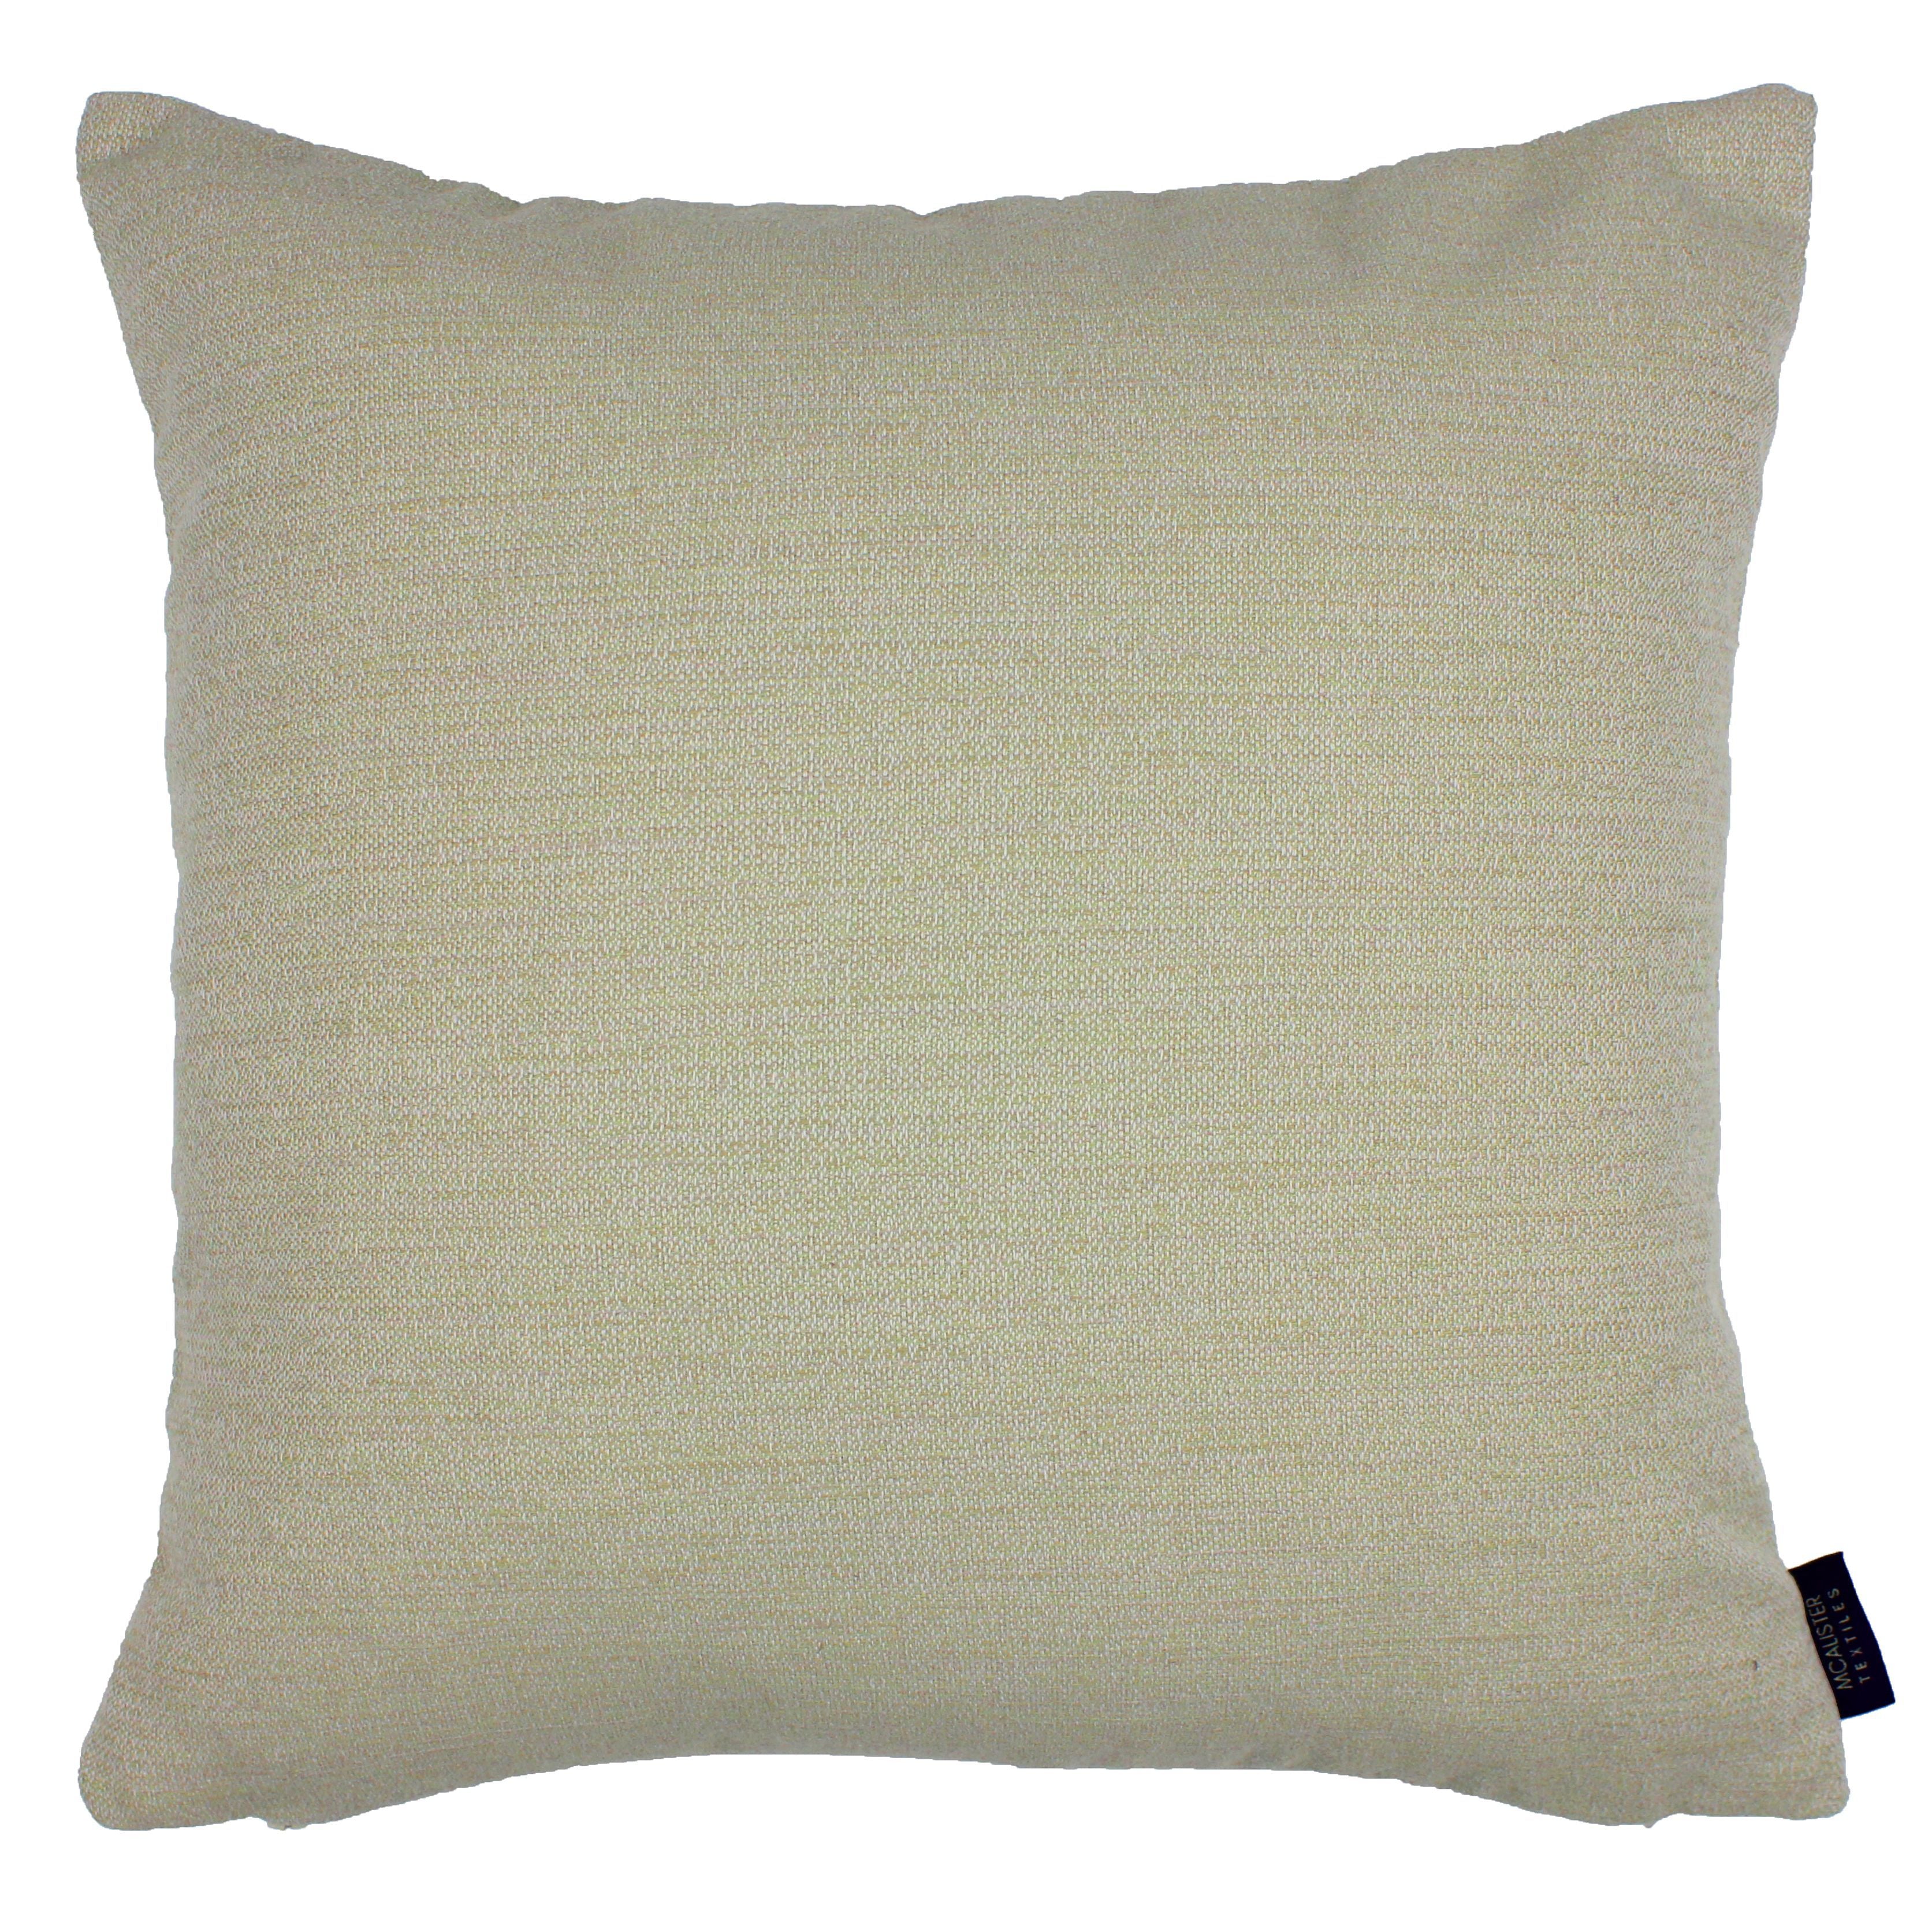 McAlister Textiles Hamleton Soft Green Textured Plain Cushion Cushions and Covers Cover Only 49cm x 49cm 